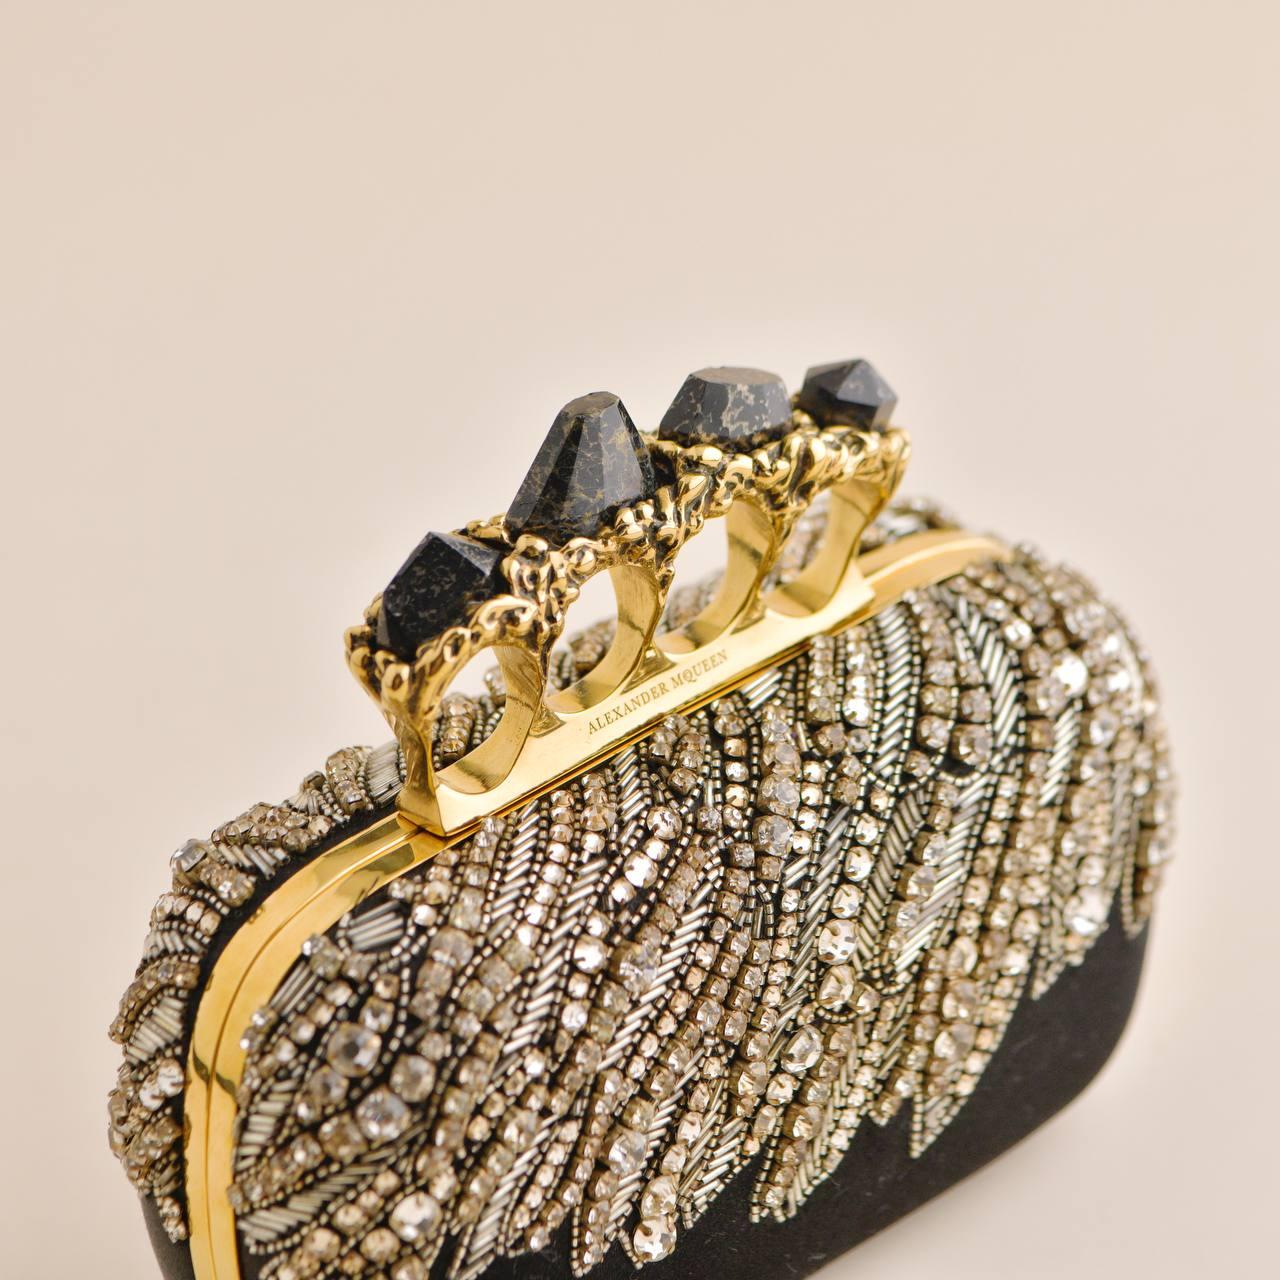 Alexander McQueen Embellished Satin Knuckle Clutch Bag In Excellent Condition For Sale In Banbury, GB